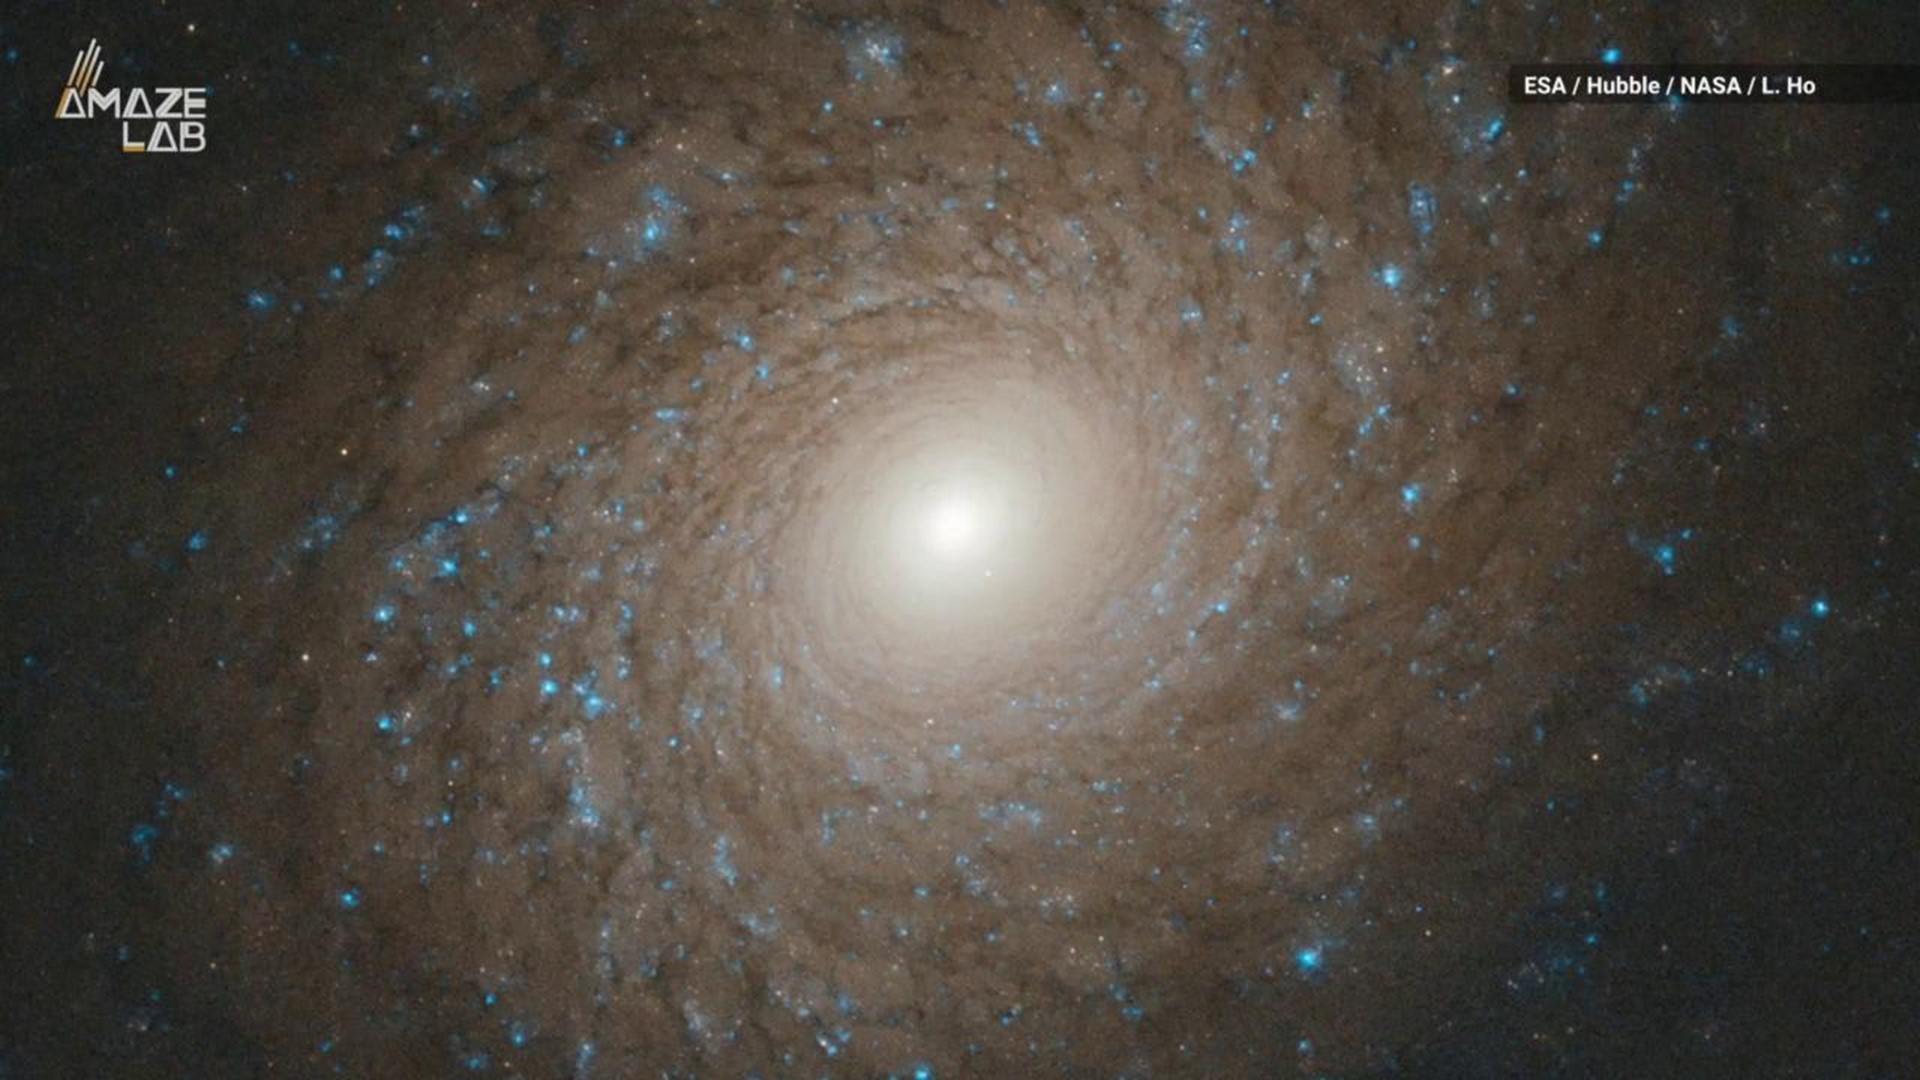 NASA says spiral galaxy NGC 2985 may collide with another galaxy one day, but for now we can enjoy it in all its symmetrical glory.